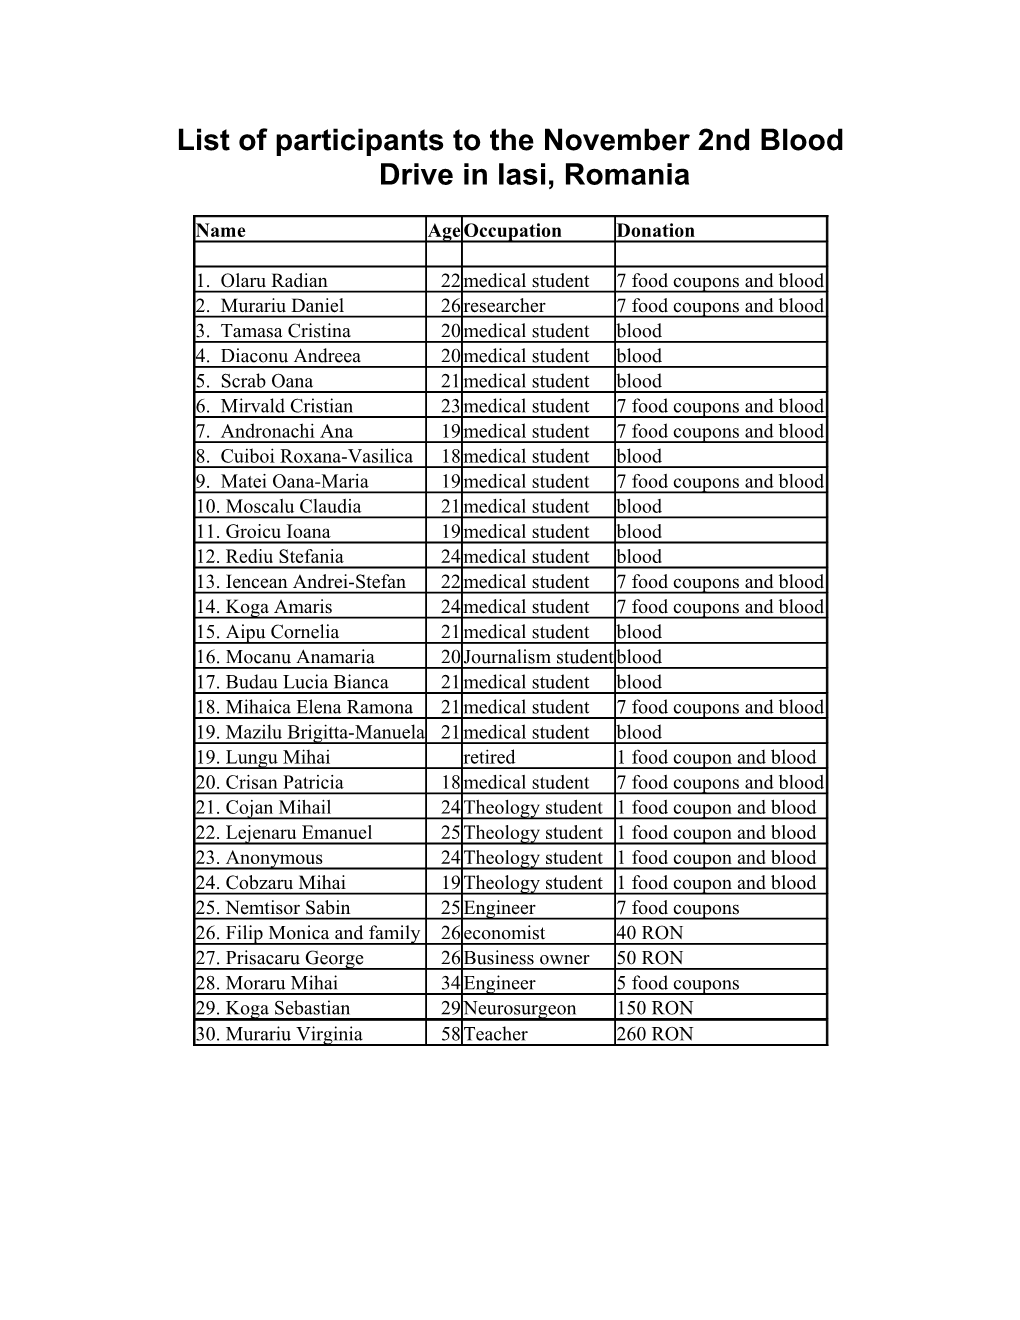 List of Participants to the November 2Nd Blood Drive in Iasi, Romania